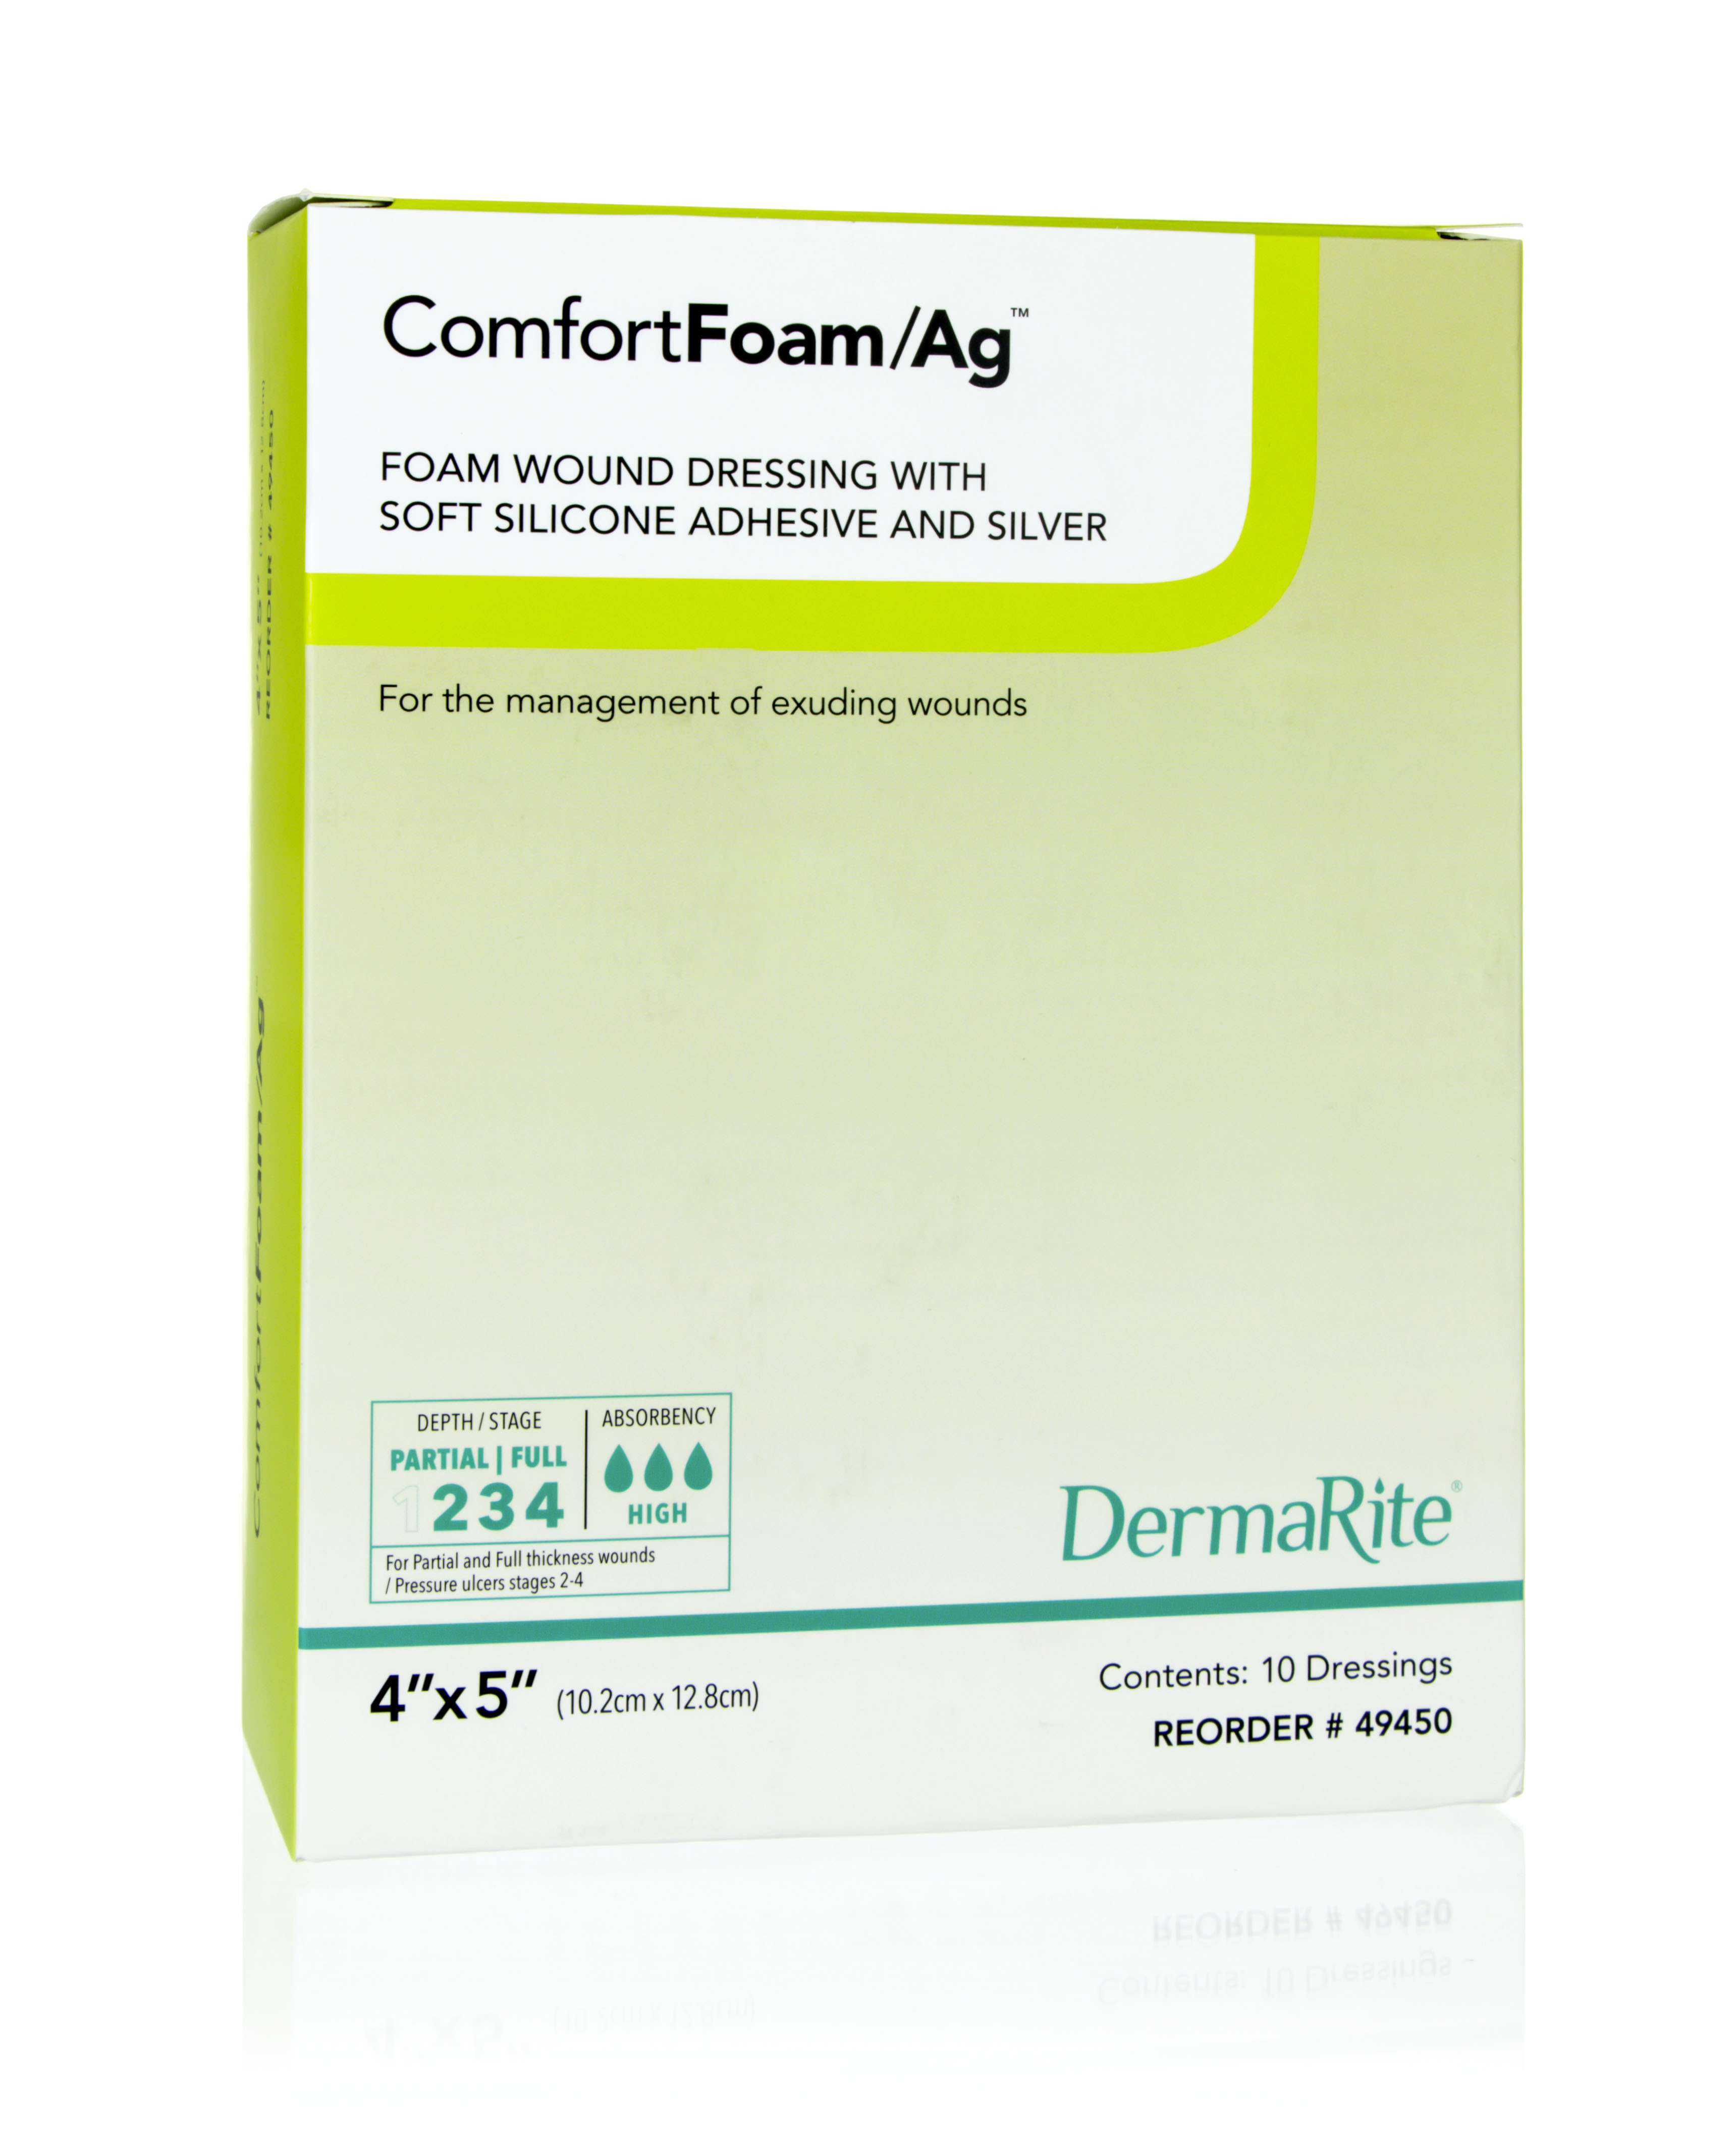 DermaRite ComfortFoam/Ag Foam Wound Dressing with Soft Silicone Adhesive and Silver, Sterile, 4 X 4"